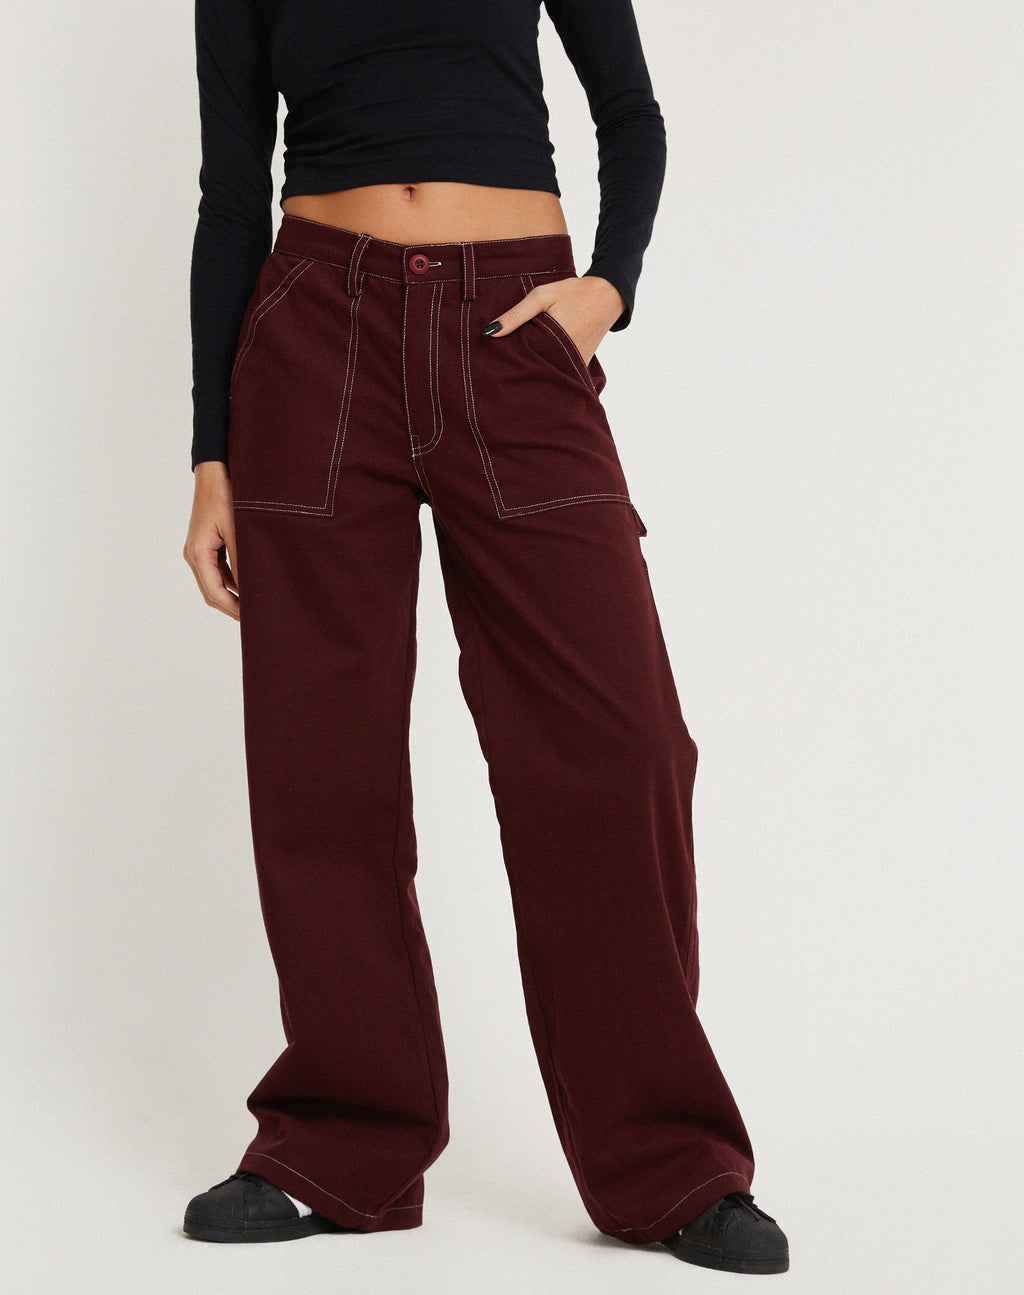 Kusnaedi Wide Leg Trouser in Redwood and White Top Stitch